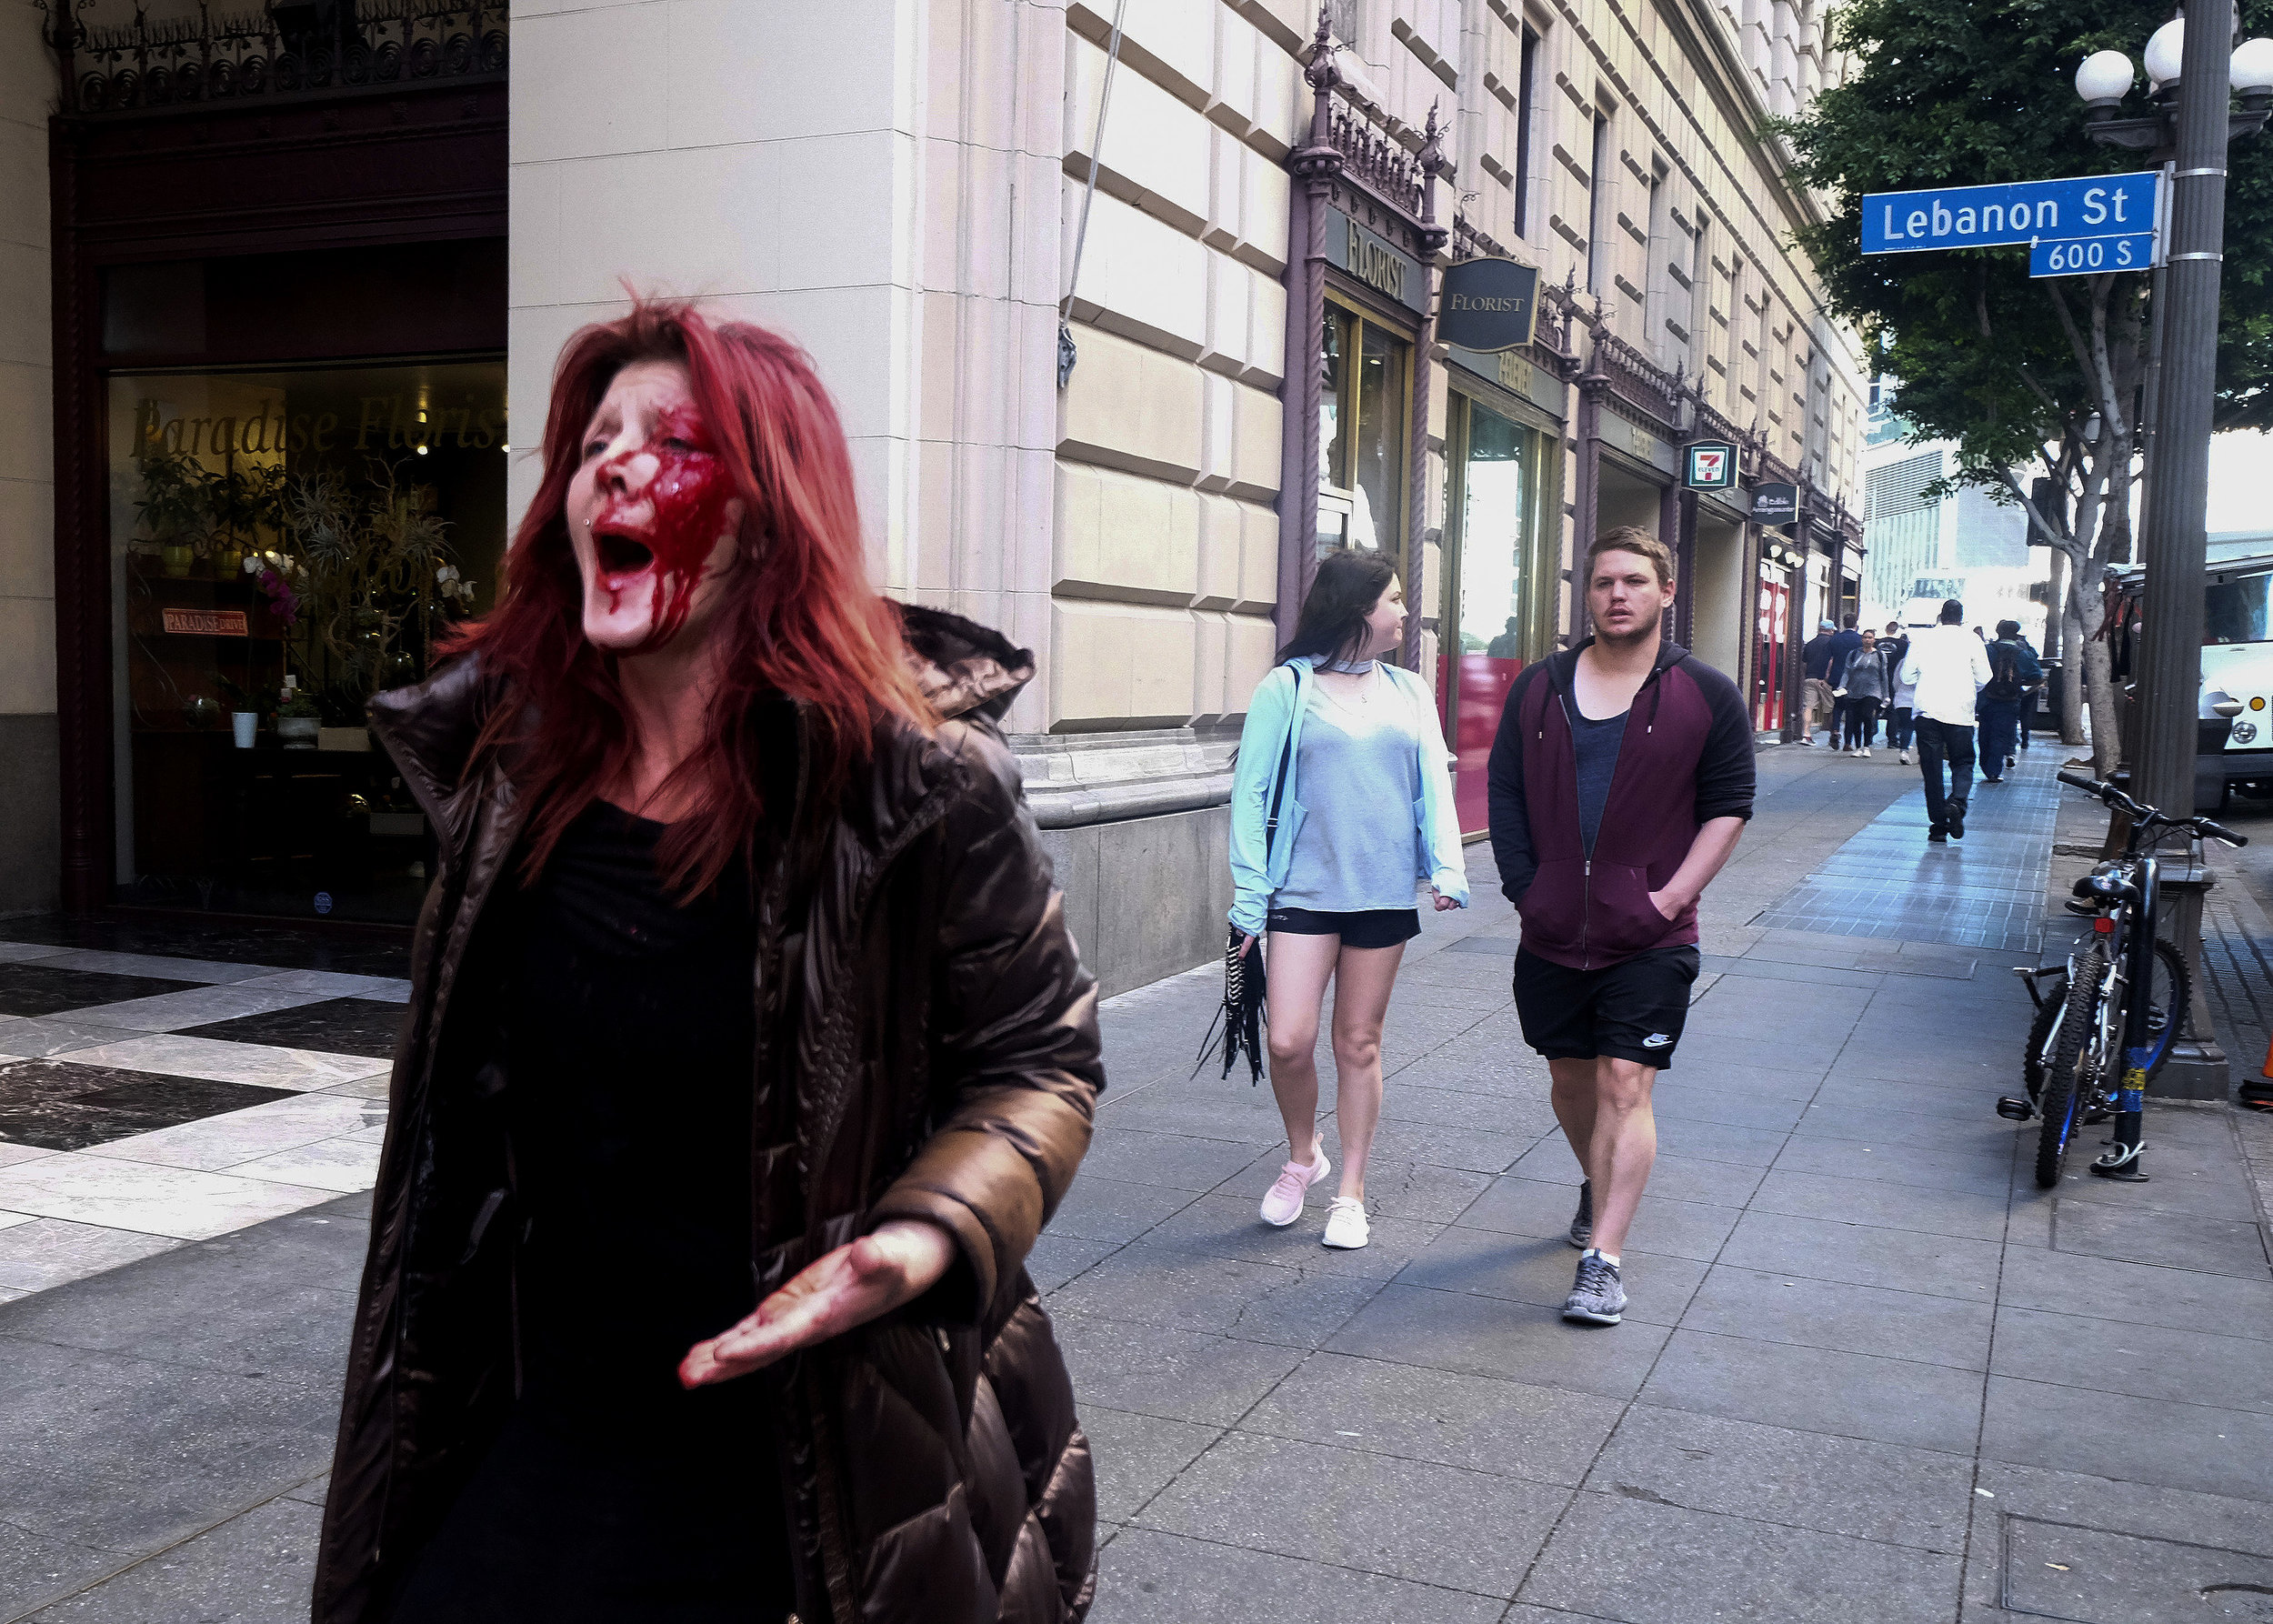  A woman with her face covered in blood after being assaulted by a man (white top in the back) in downtown Los Angeles, Wednesday, Jan 24, 2018. The suspect was taken into custody and it is believed he and the victim knew each other so this was not a